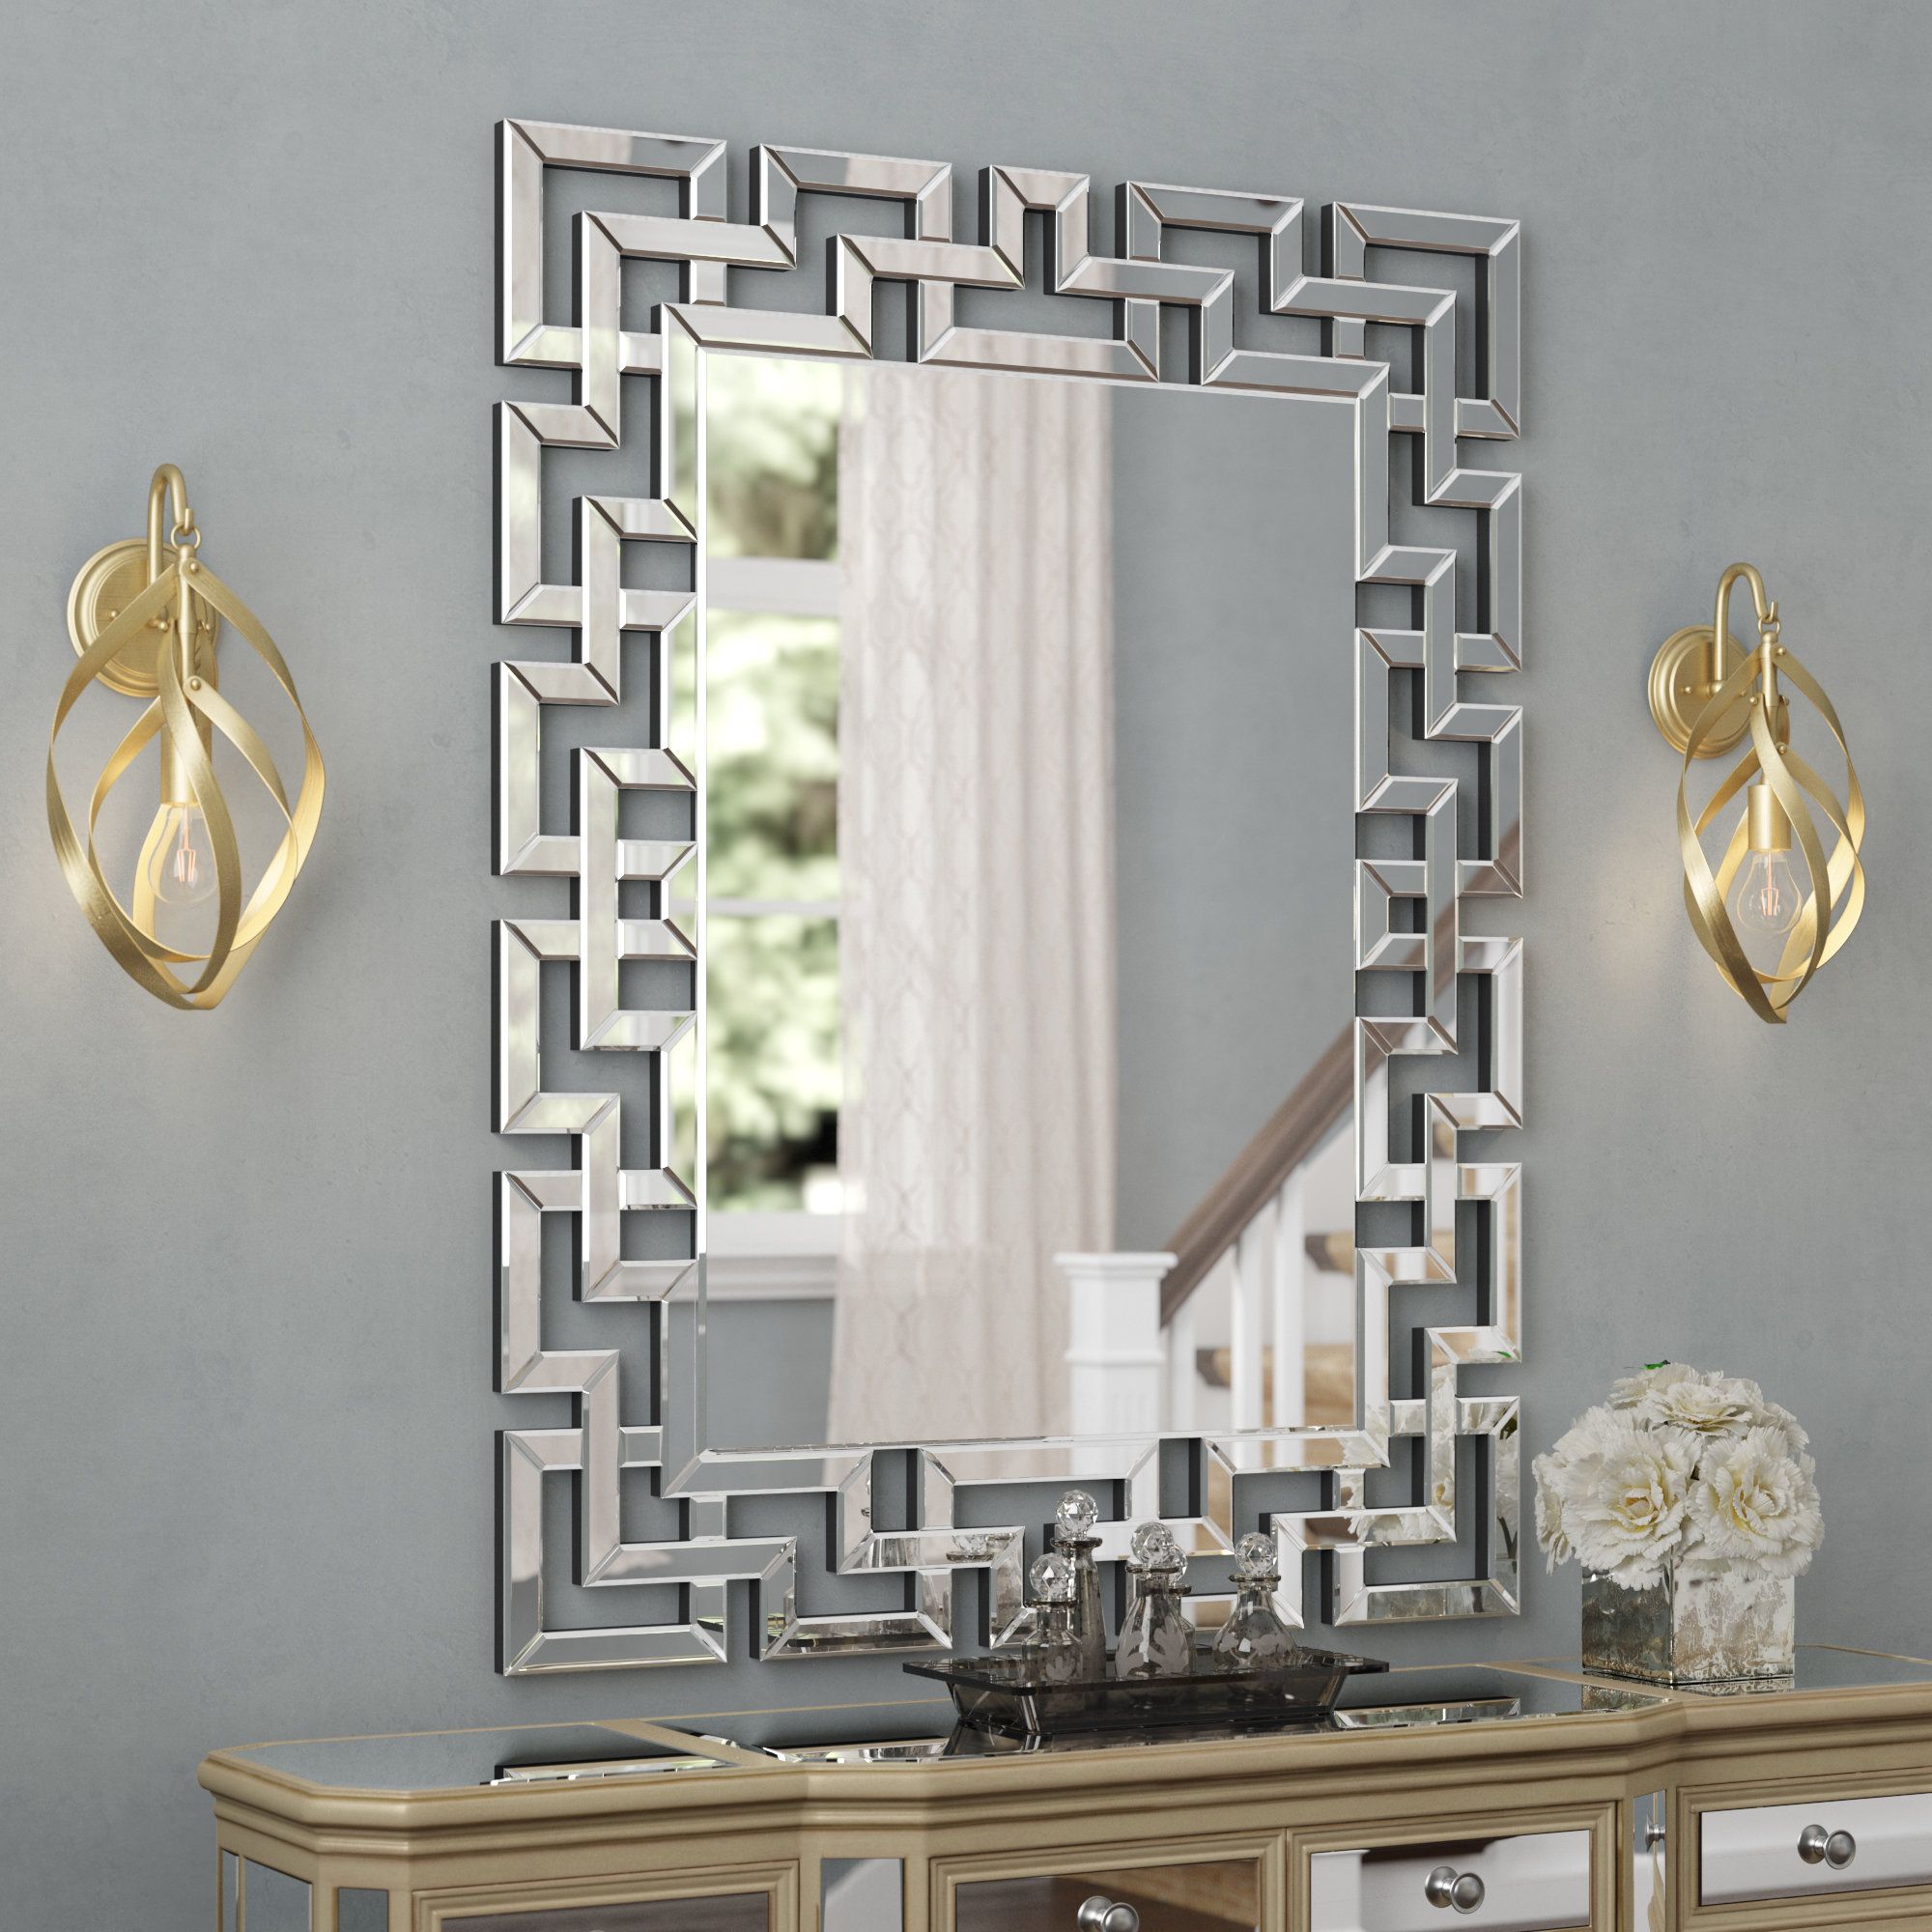 Caja Rectangle Glass Frame Wall Mirror Throughout Rectangle Ornate Geometric Wall Mirrors (View 5 of 20)